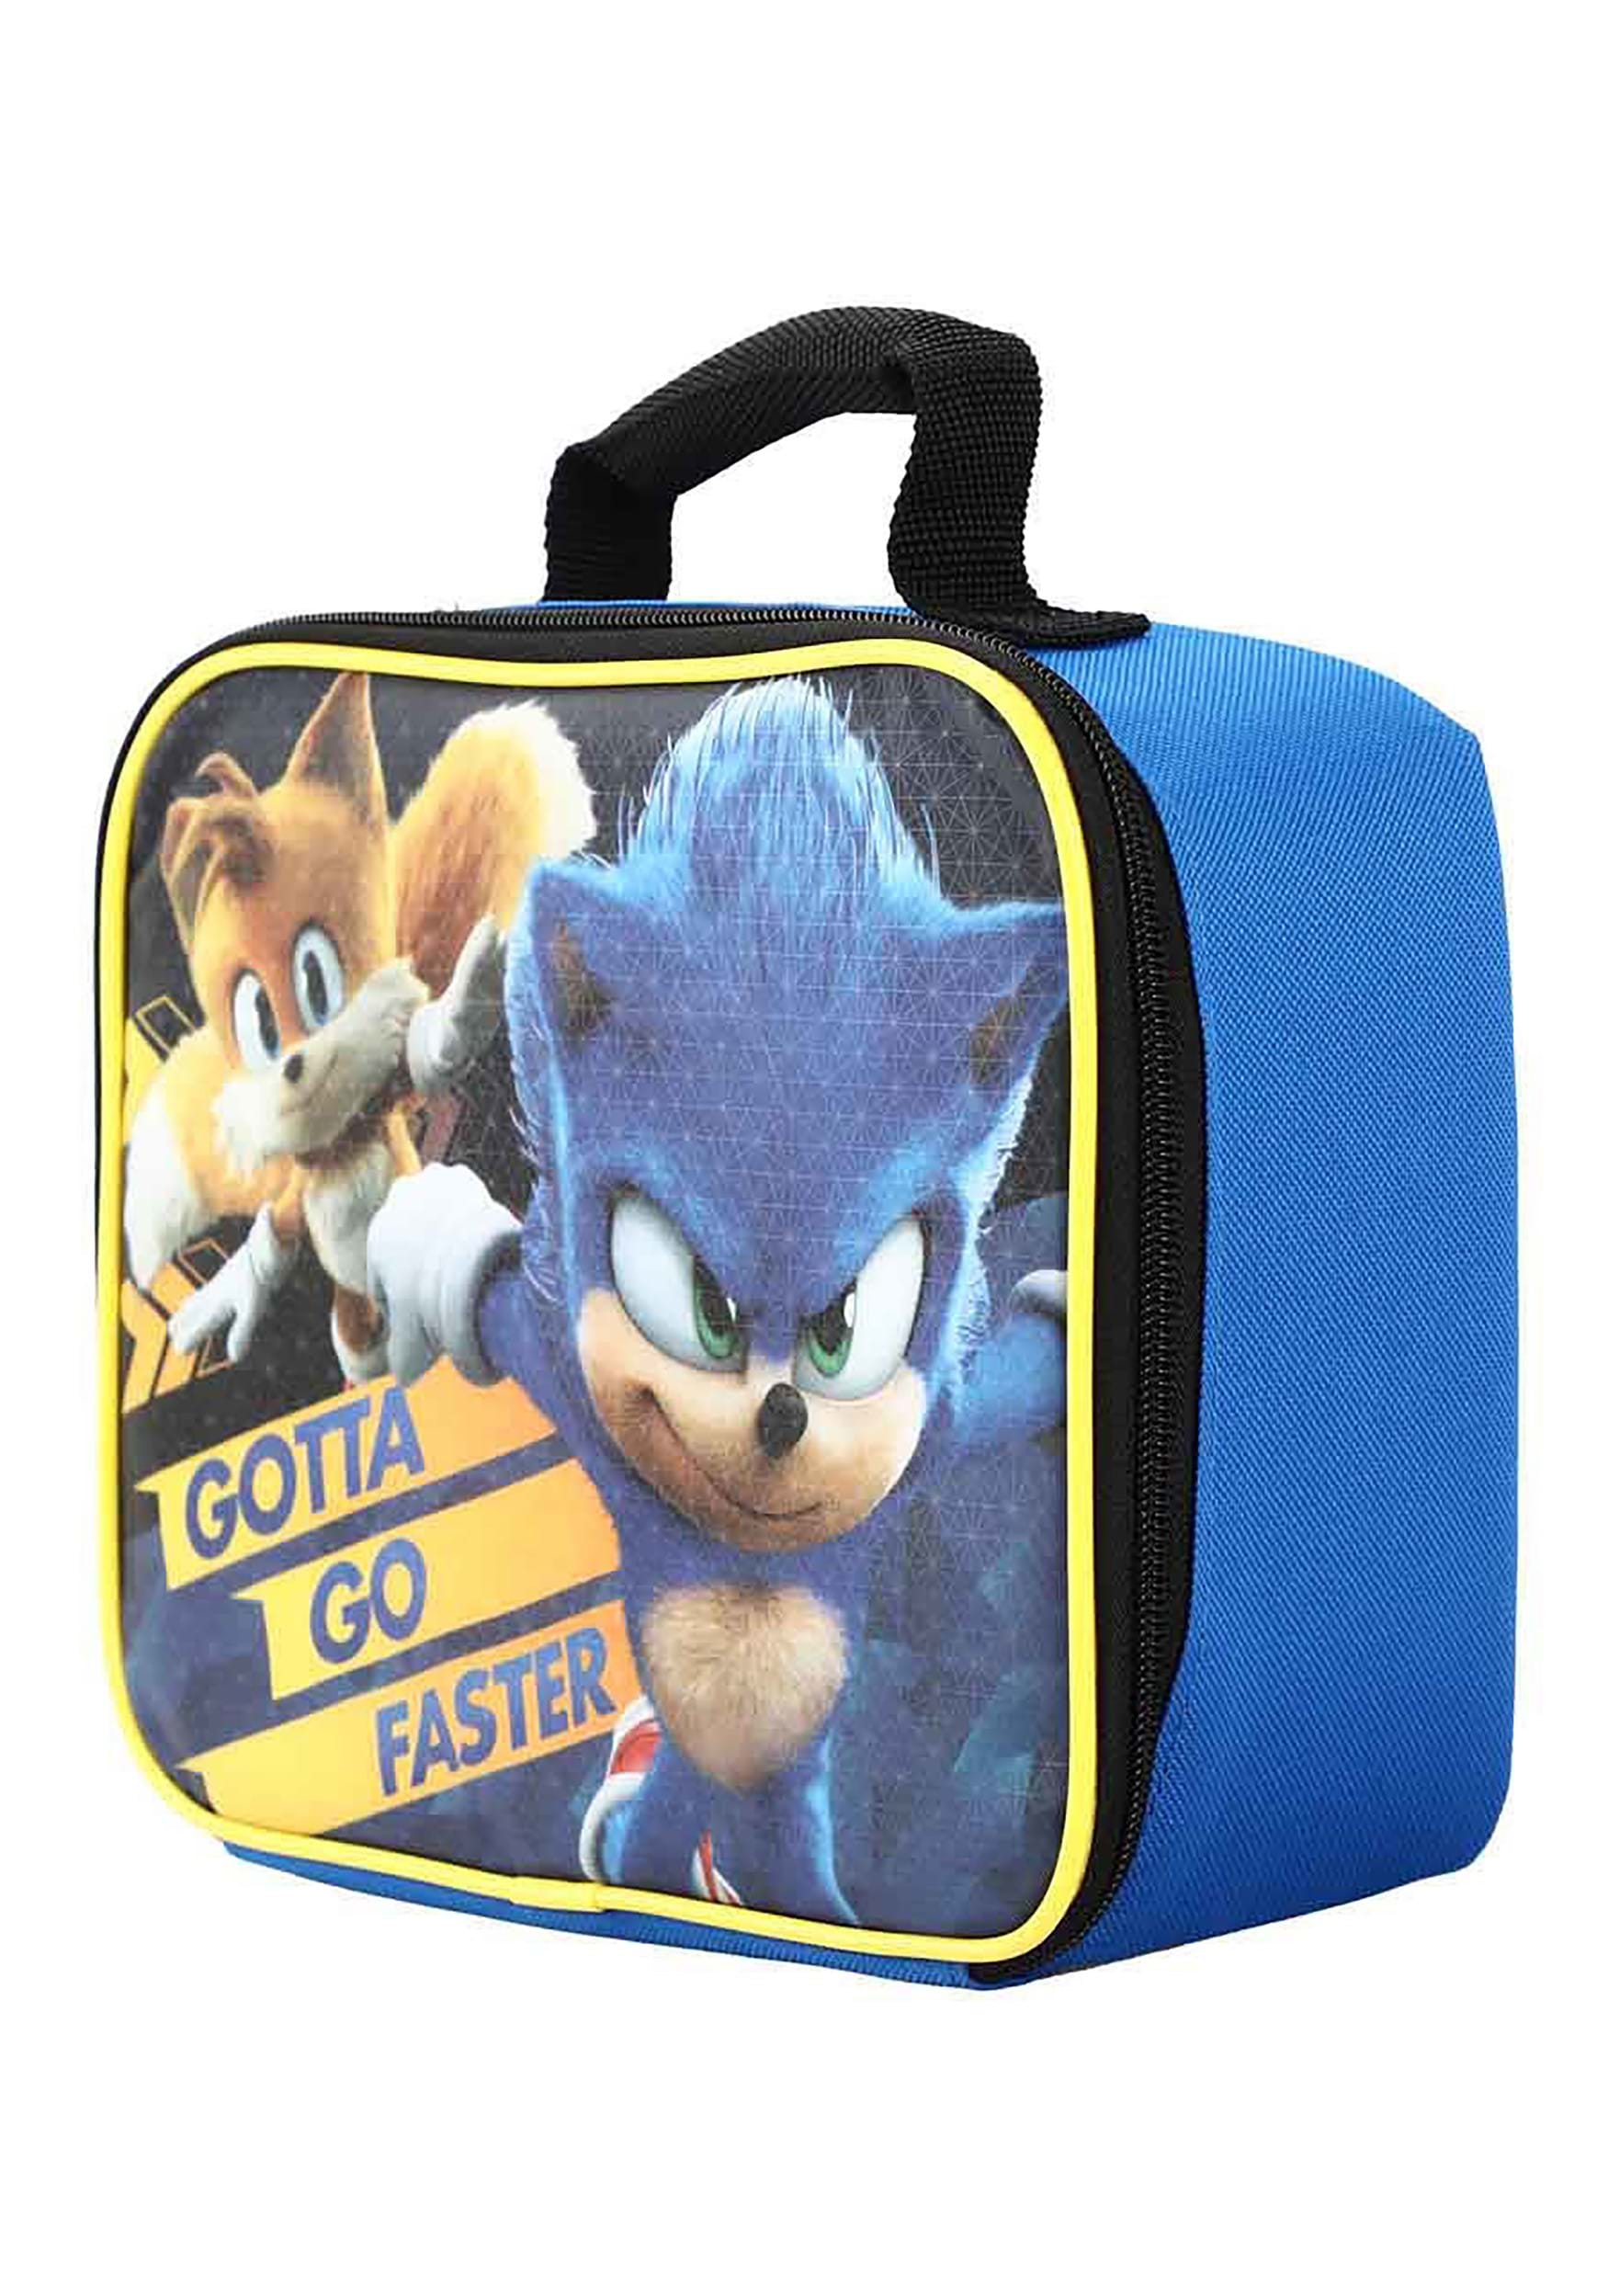 Sonic The Hedgehog Gotta Go Faster Lunch Tote